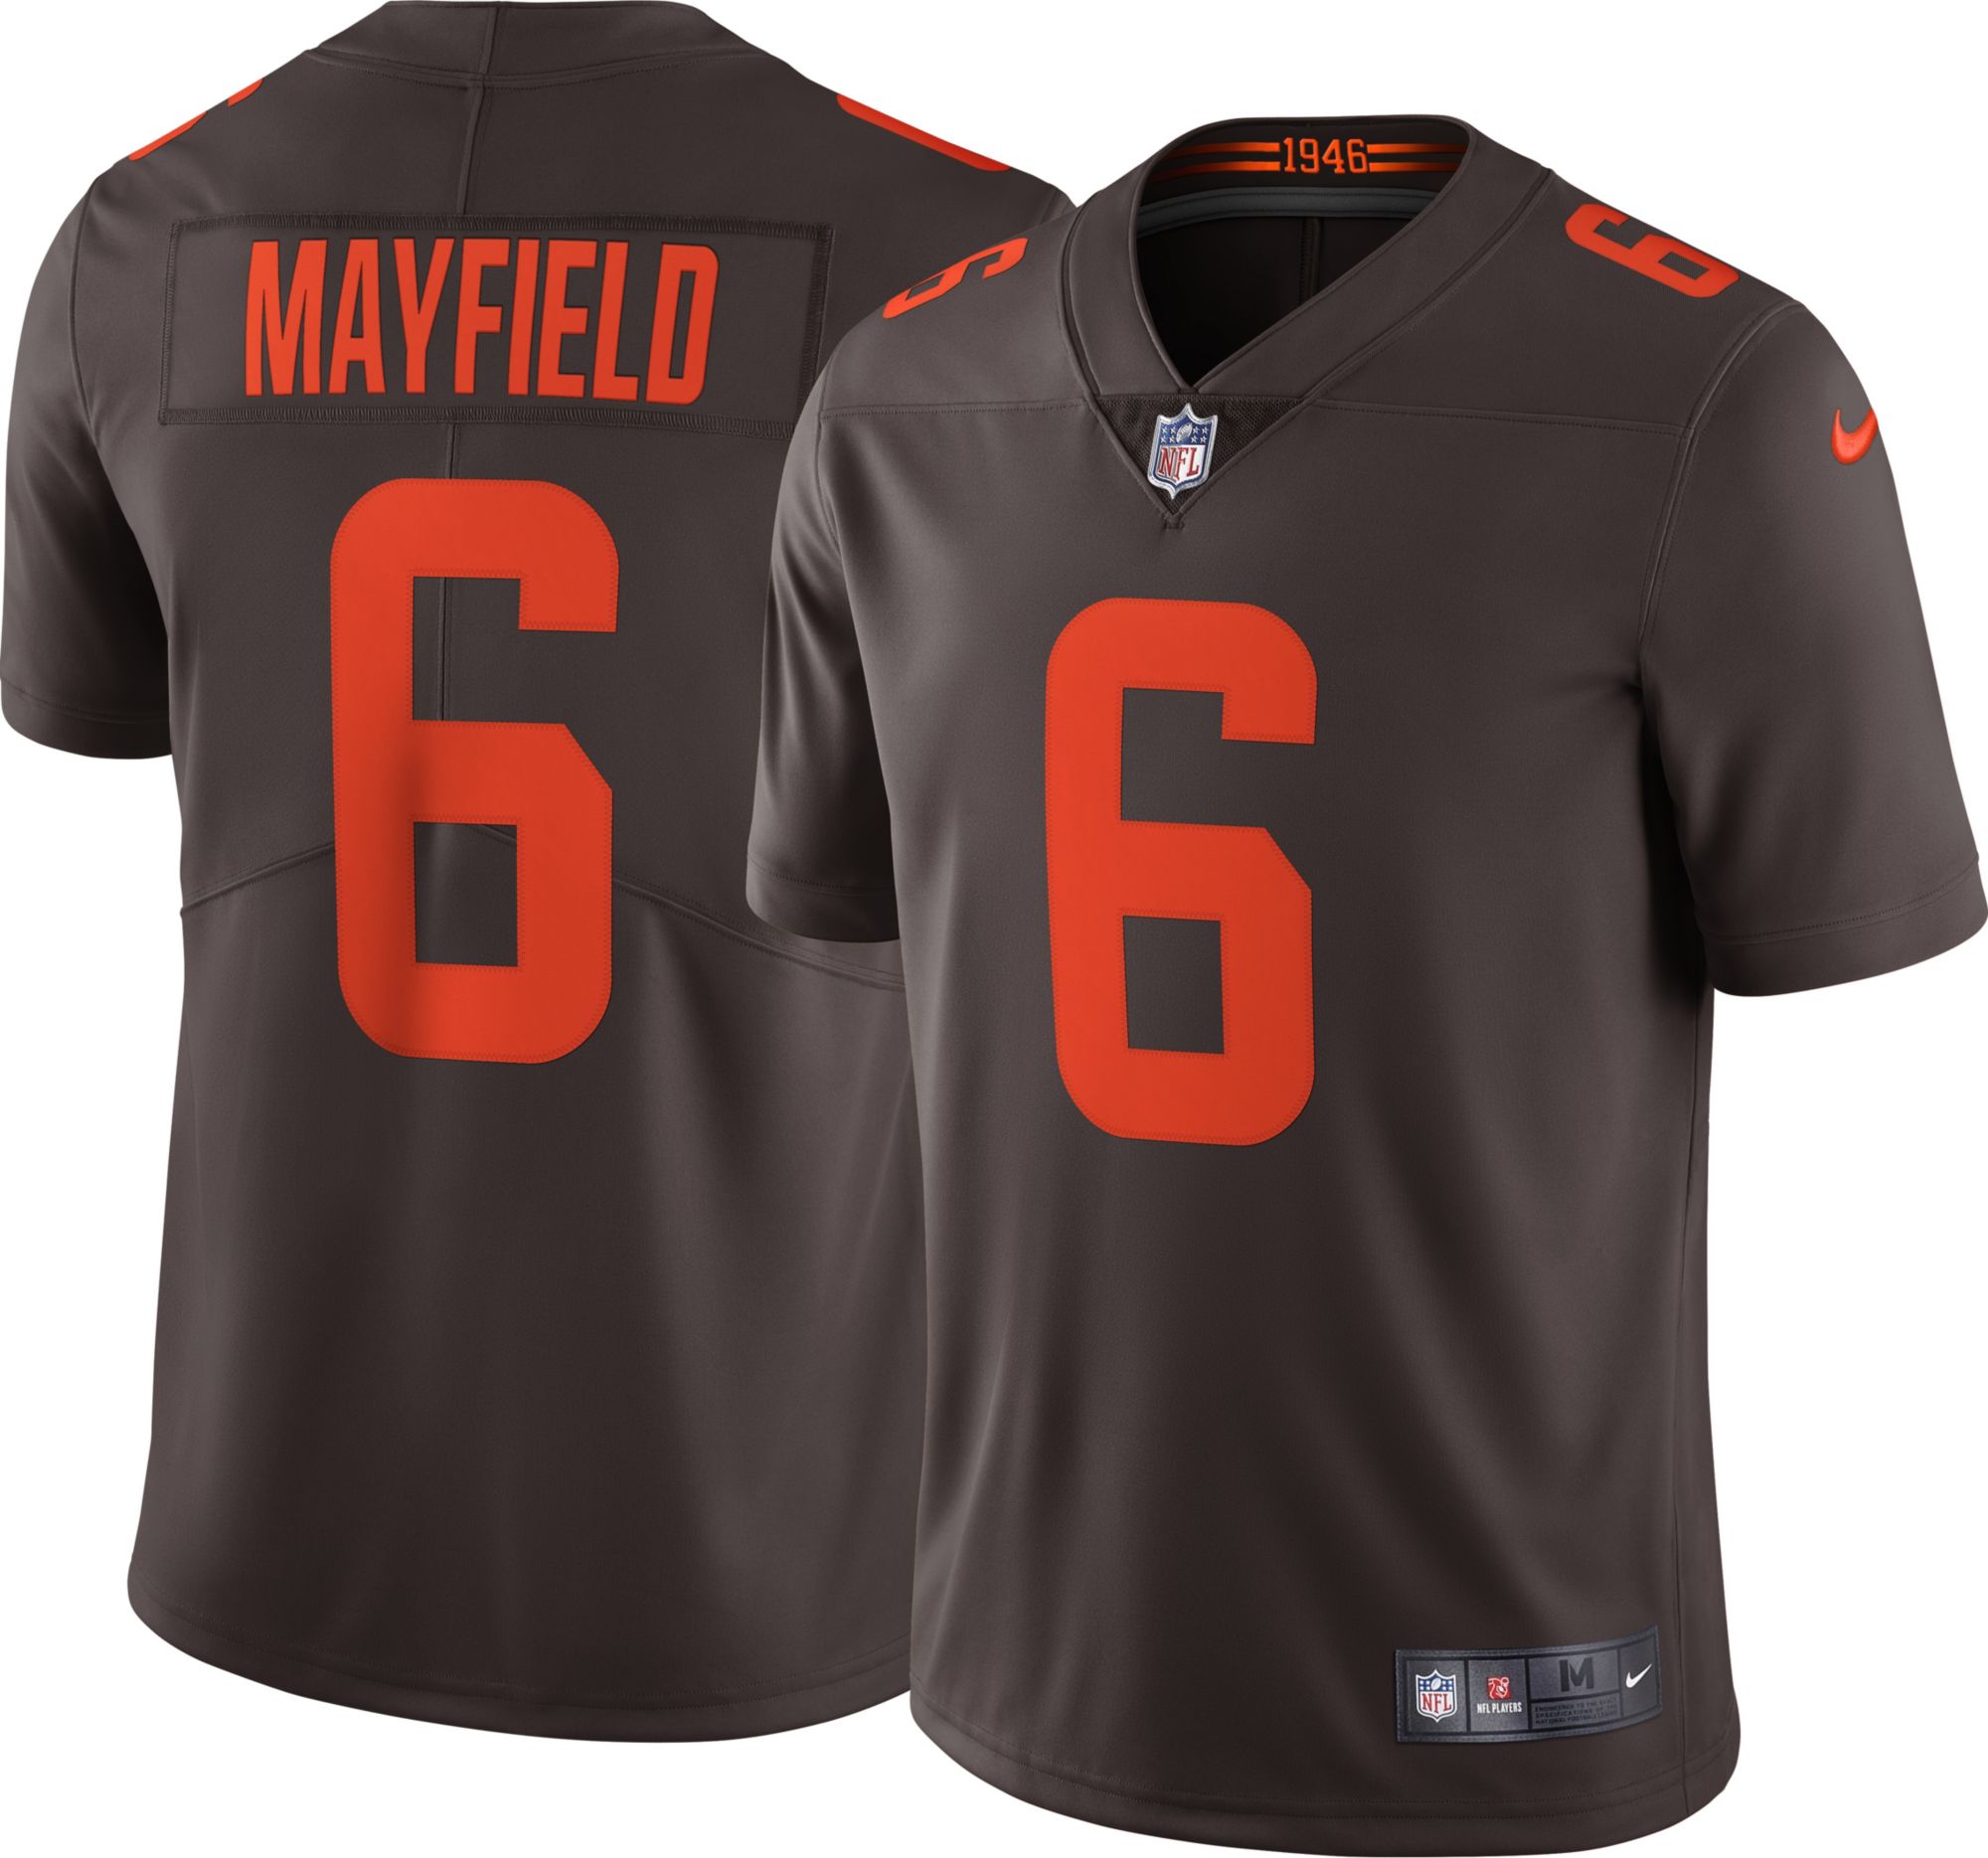 browns jersey colors